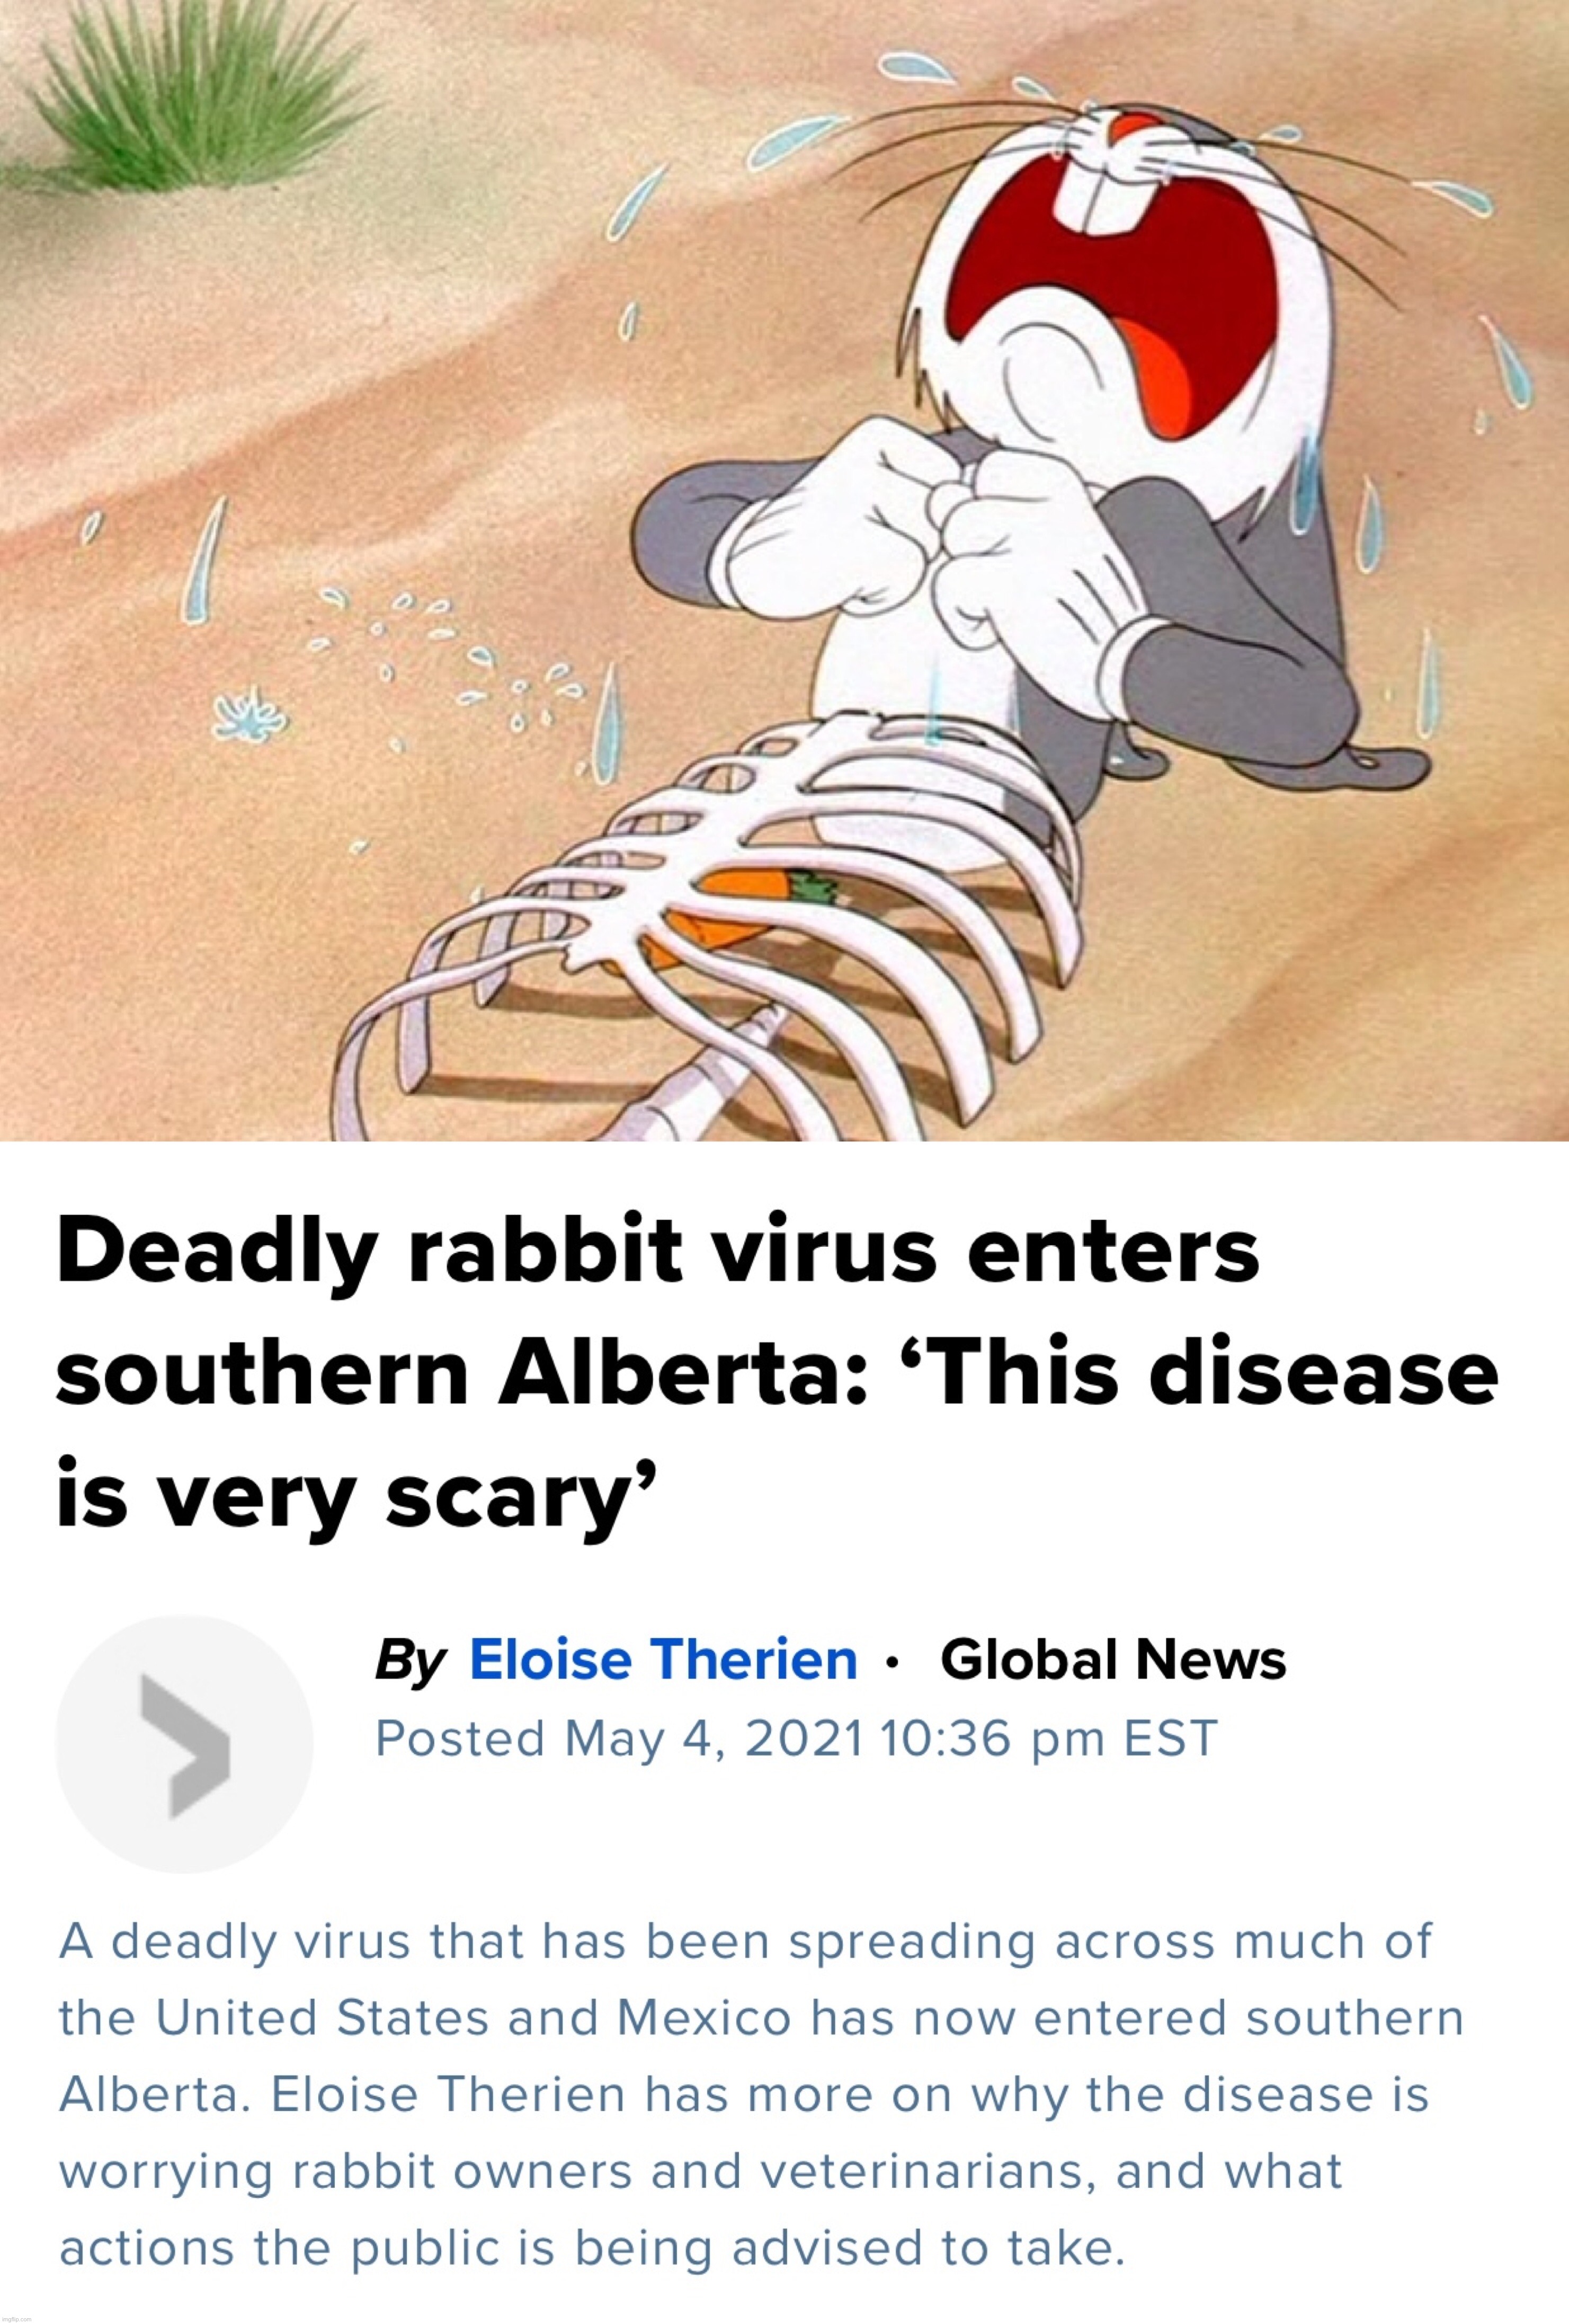 Oh no, so they will want to vaxx the wabbits? | image tagged in anti-vaxx,vaccines,rabbits,bugs bunny,virus,canada | made w/ Imgflip meme maker